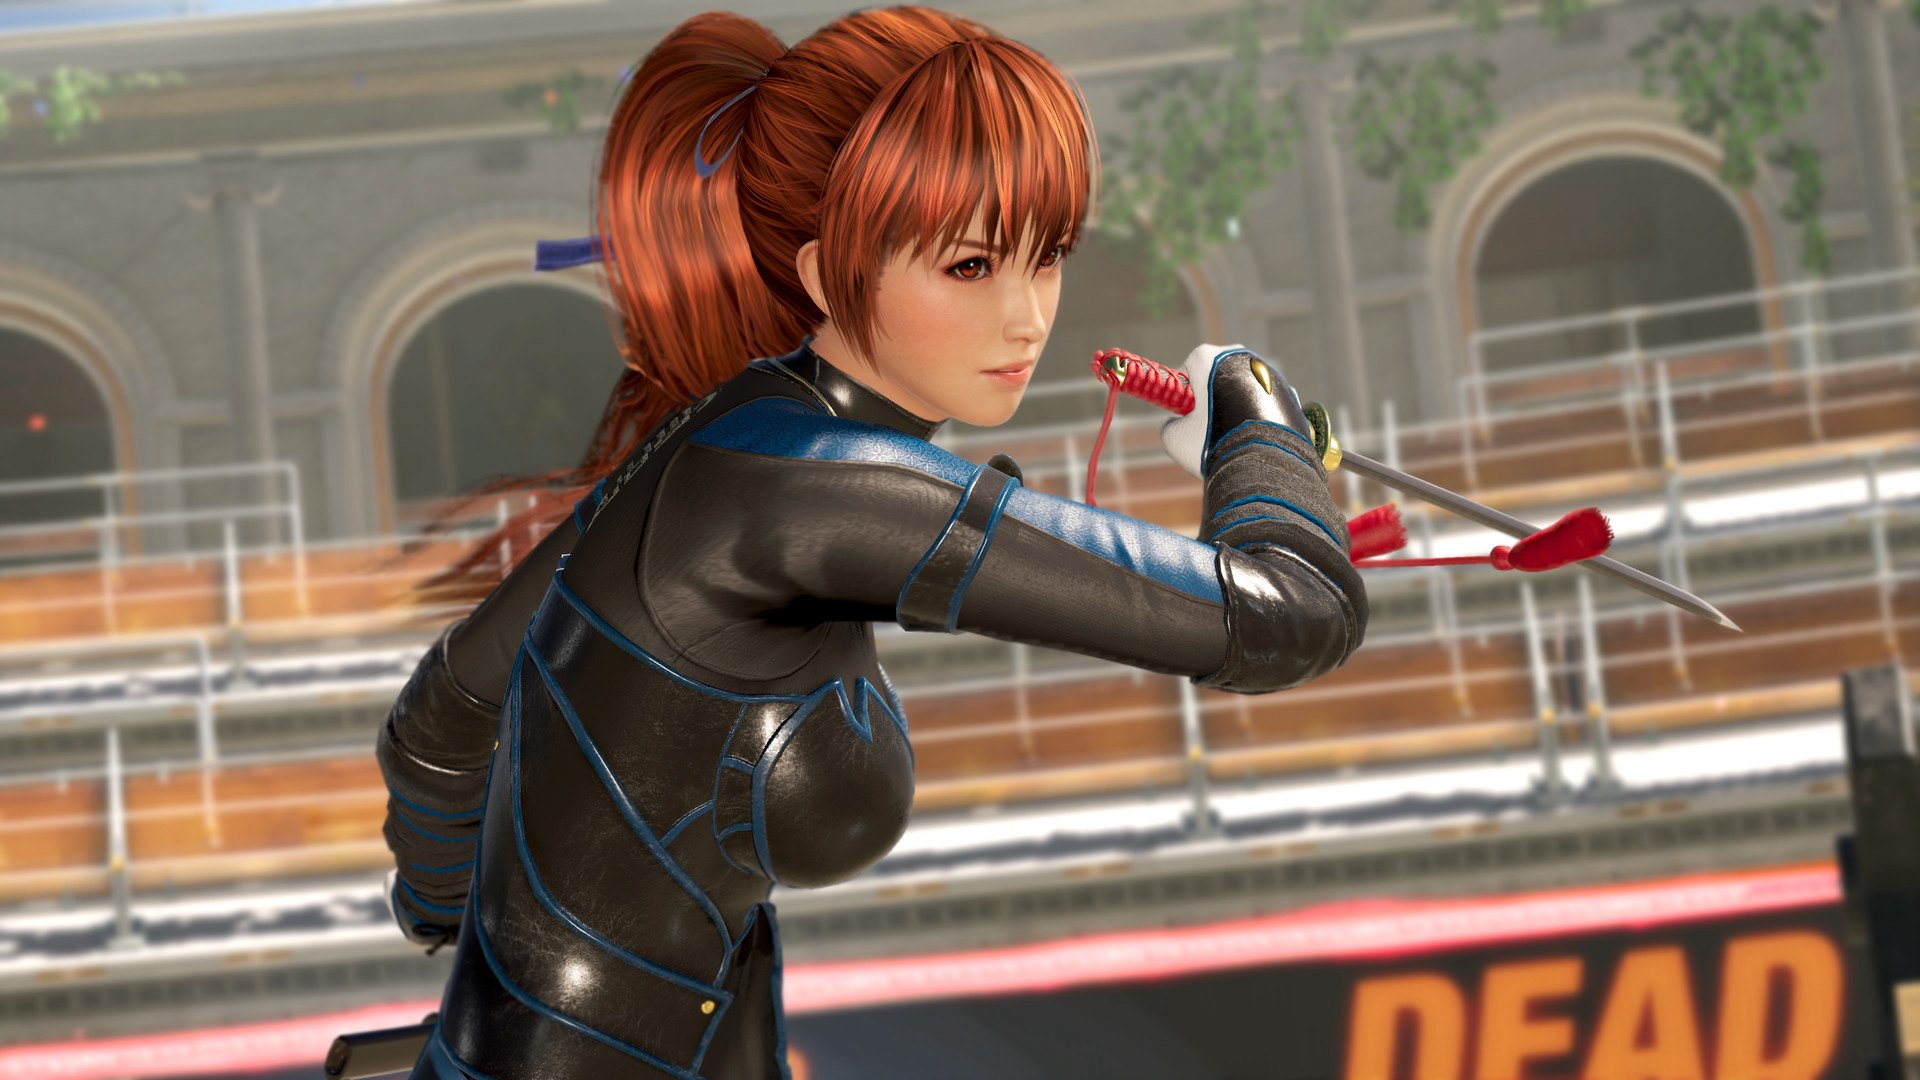 DEAD OR ALIVE 6 Digital Deluxe Edition Steam Altergift